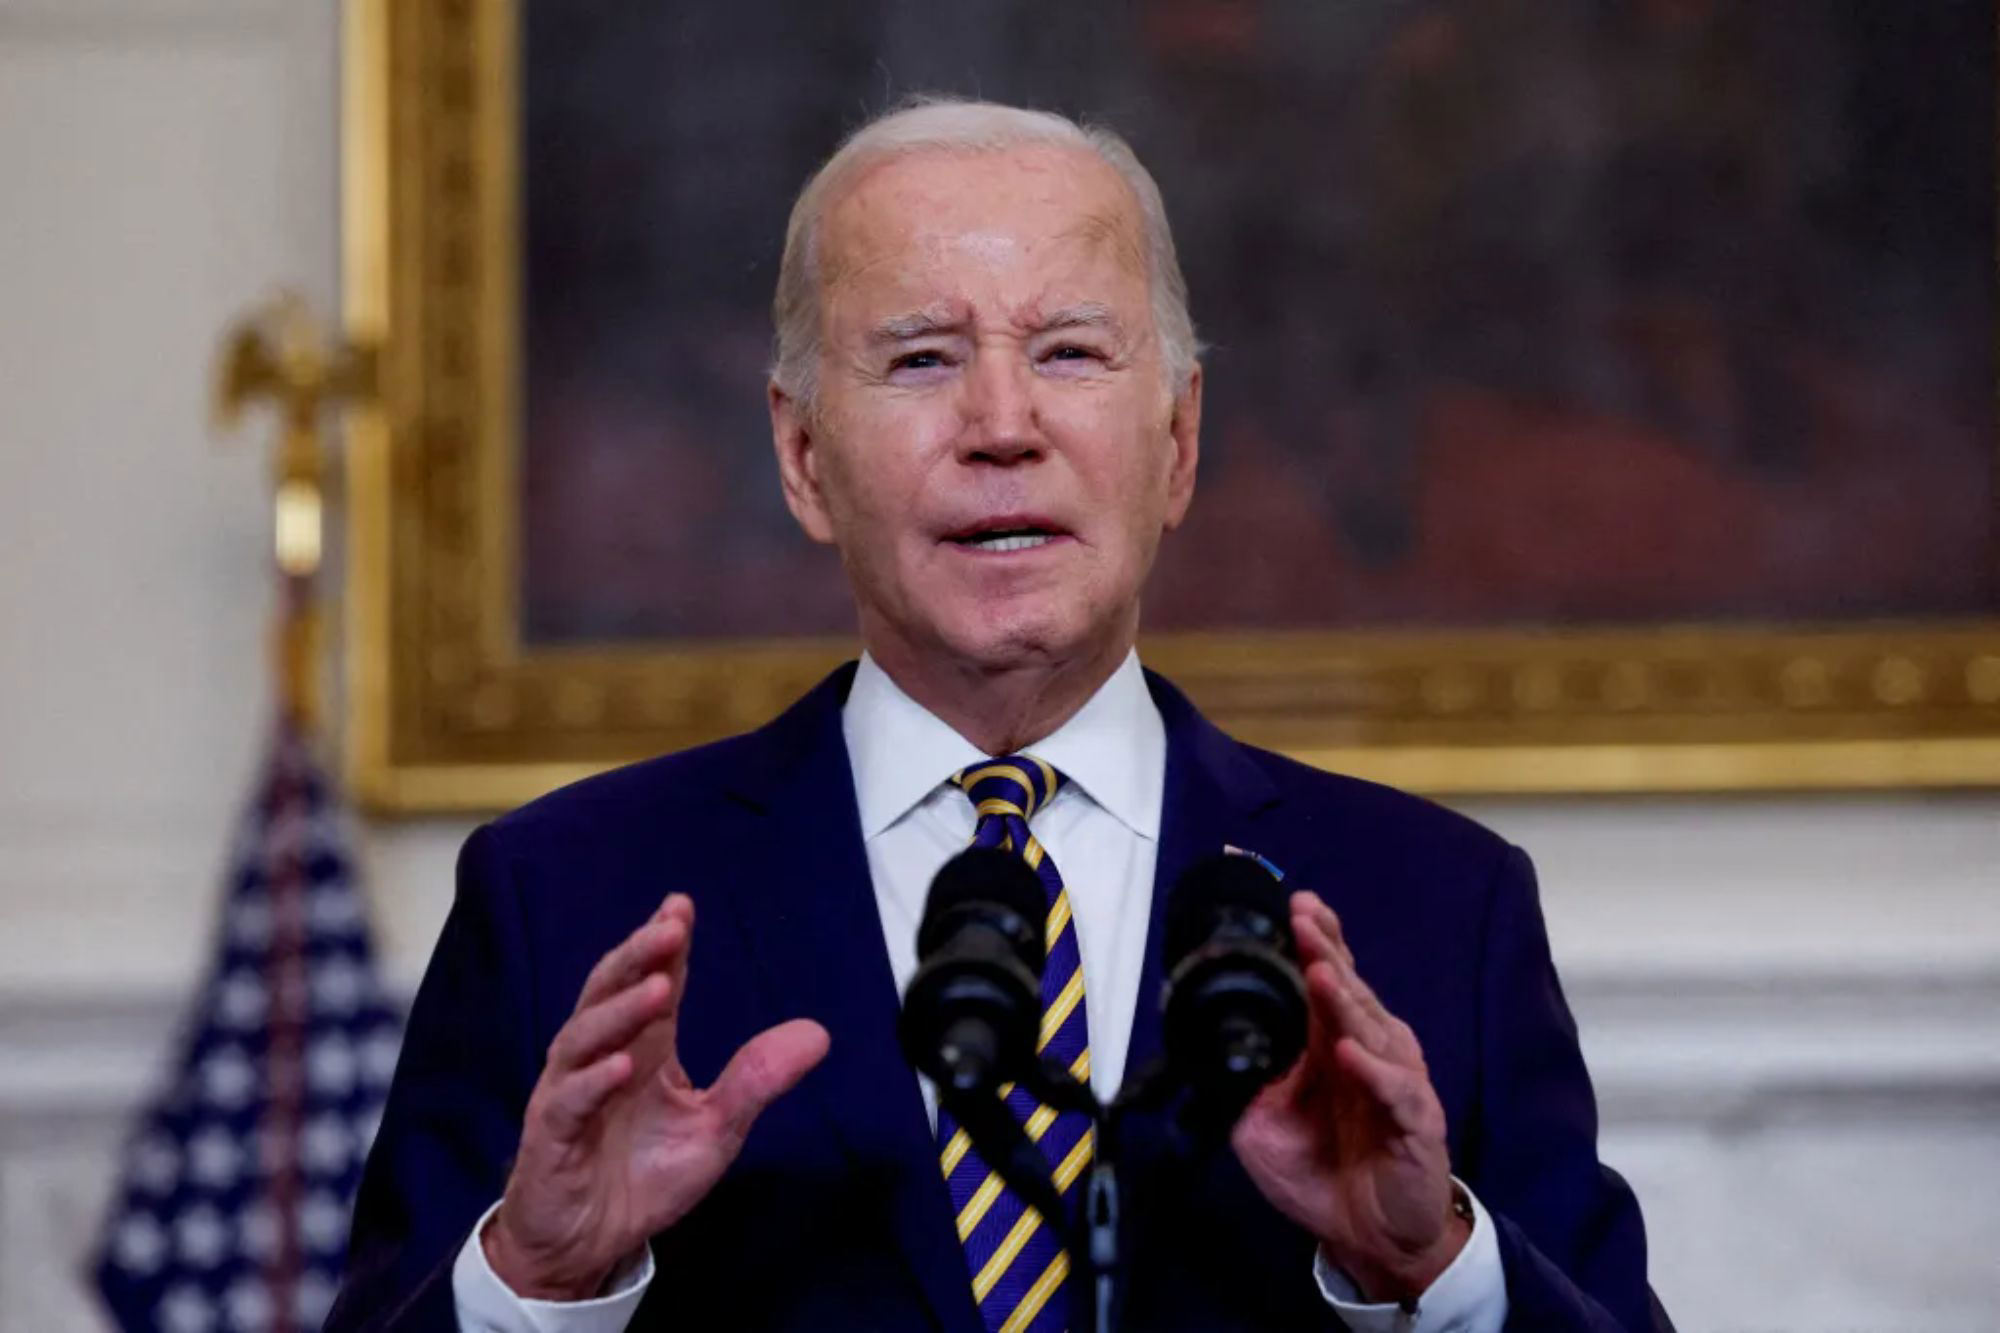 Joe Biden The most unfit incumbent president up for reelection since FDR